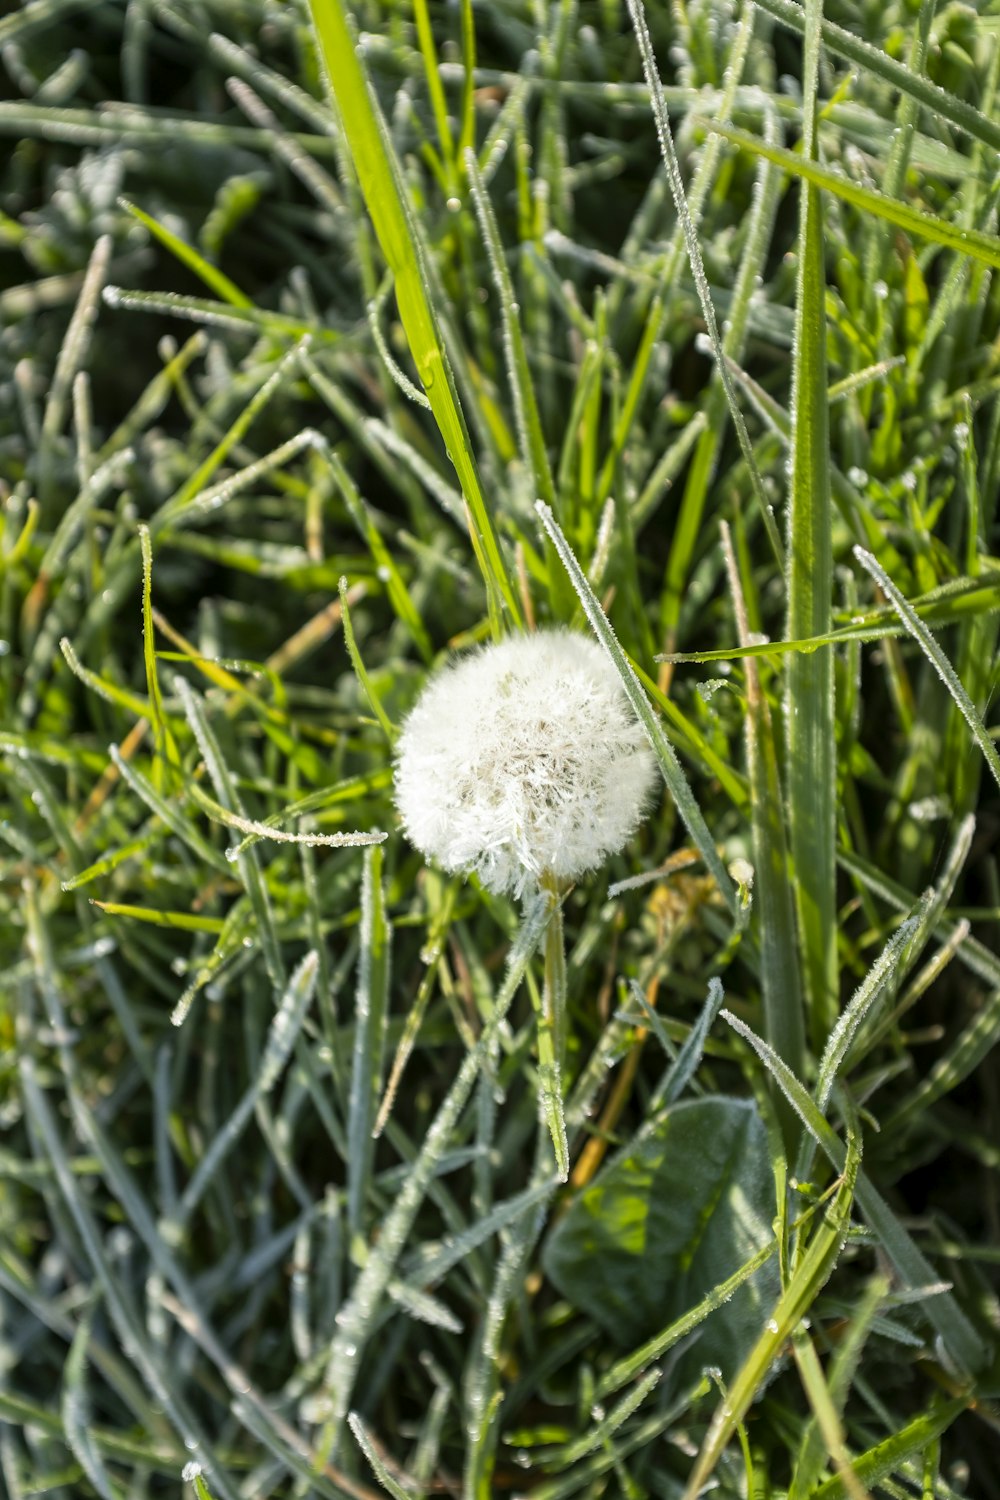 a dandelion in the middle of a field of grass